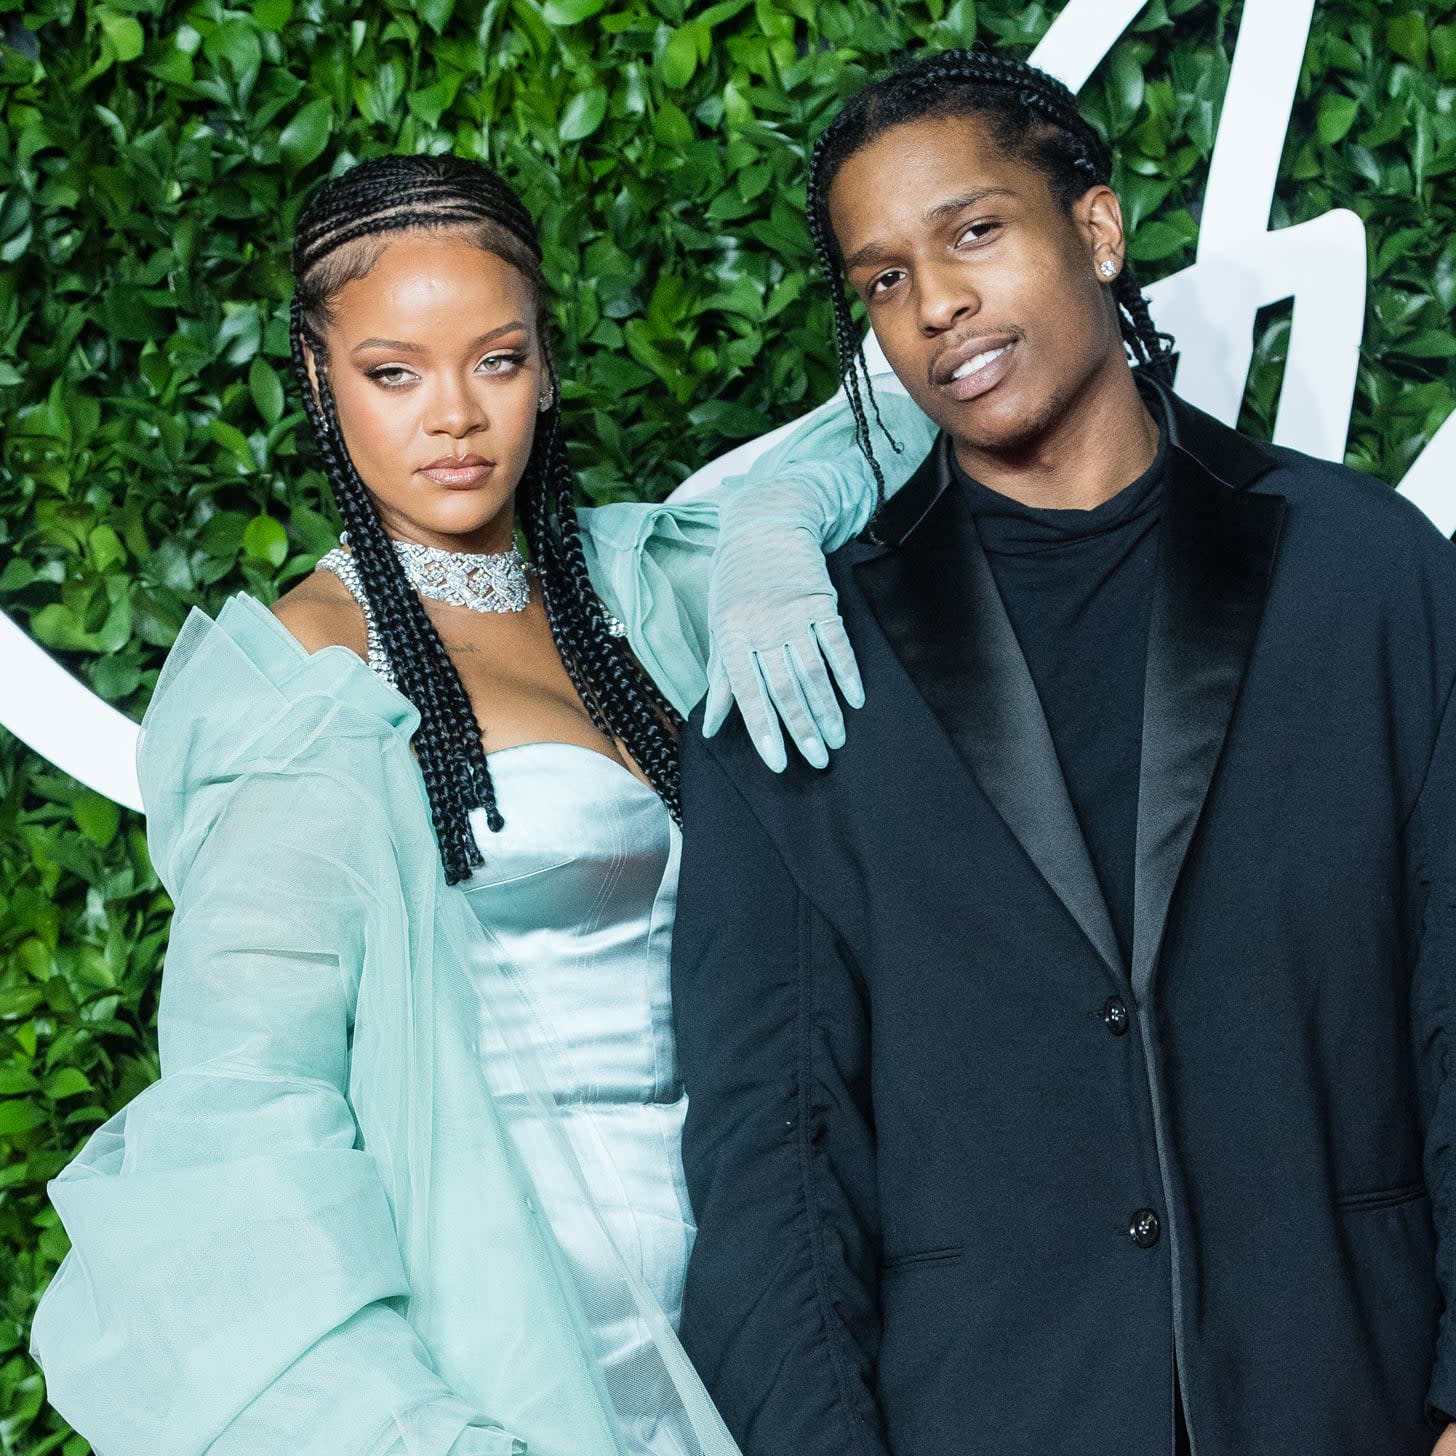 Rumors of couple Rihanna and A $ AP Rocky celebrate Christmas together in Barbados